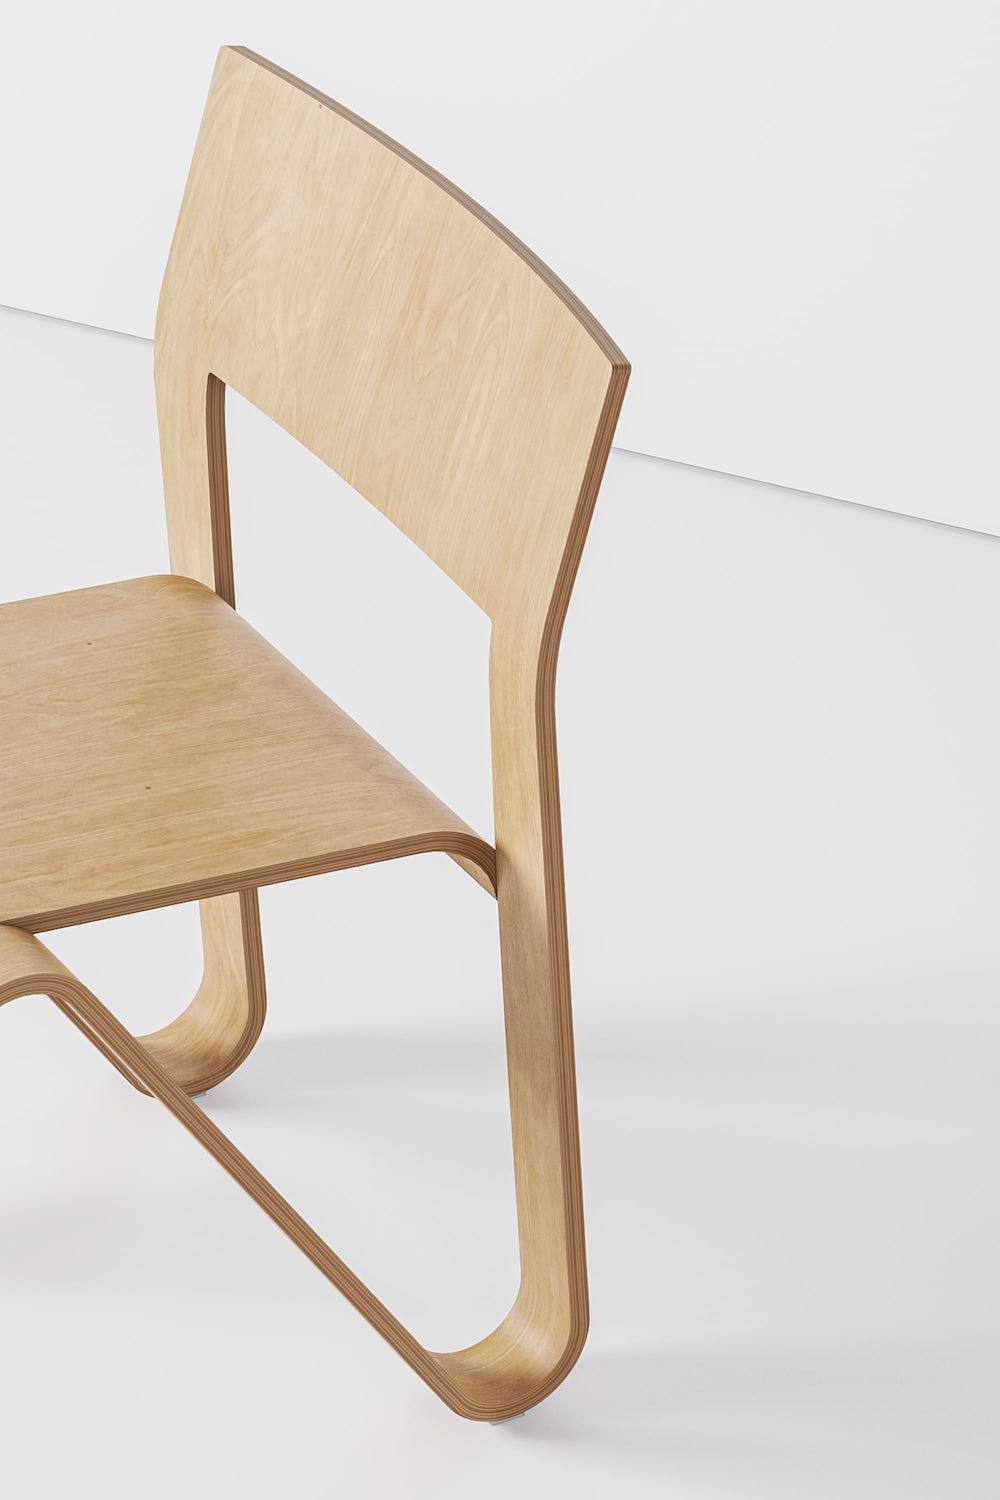 The Peel Chair by Blond 3